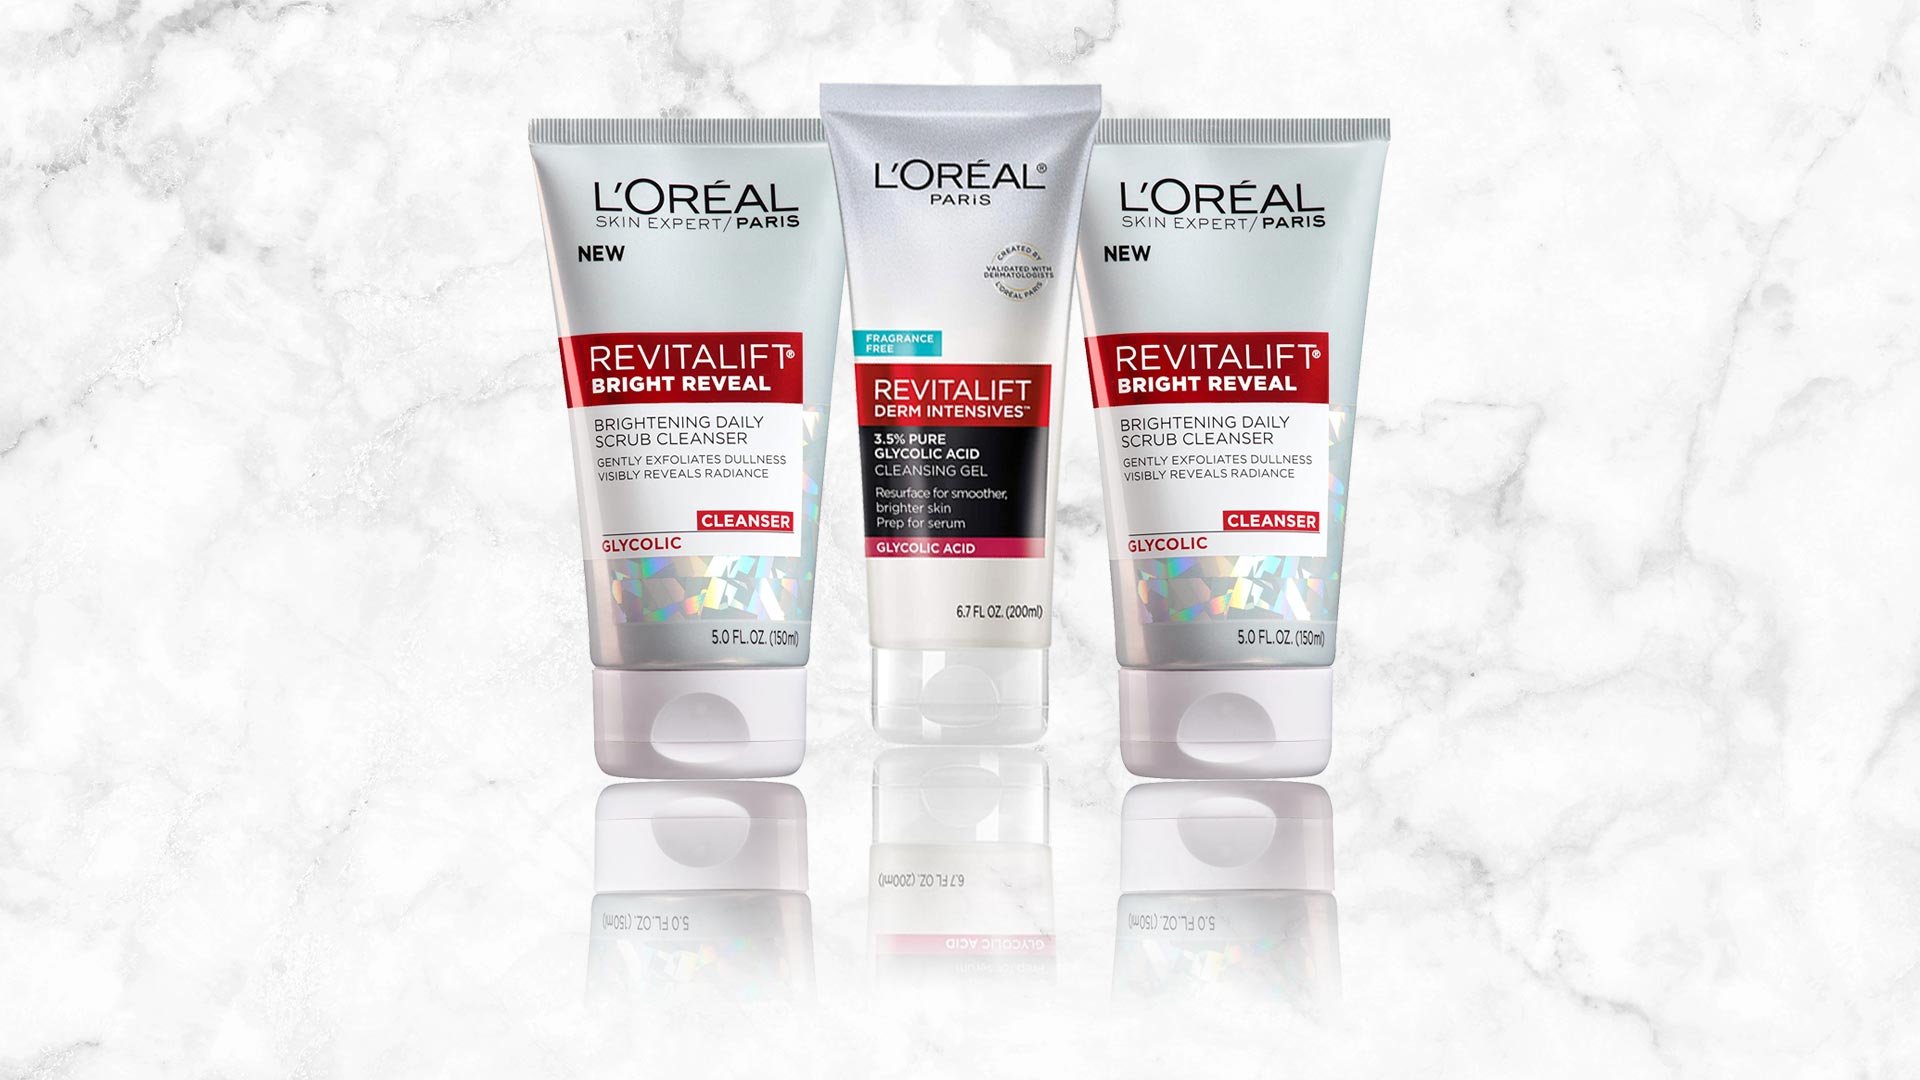 L'Oreal Paris Skincare Revitalift Bright Reveal Facial Cleanser with  Glycolic Acid, Anti-Aging Daily Face Cleanser to Exfoliate Dullness and  Brighten